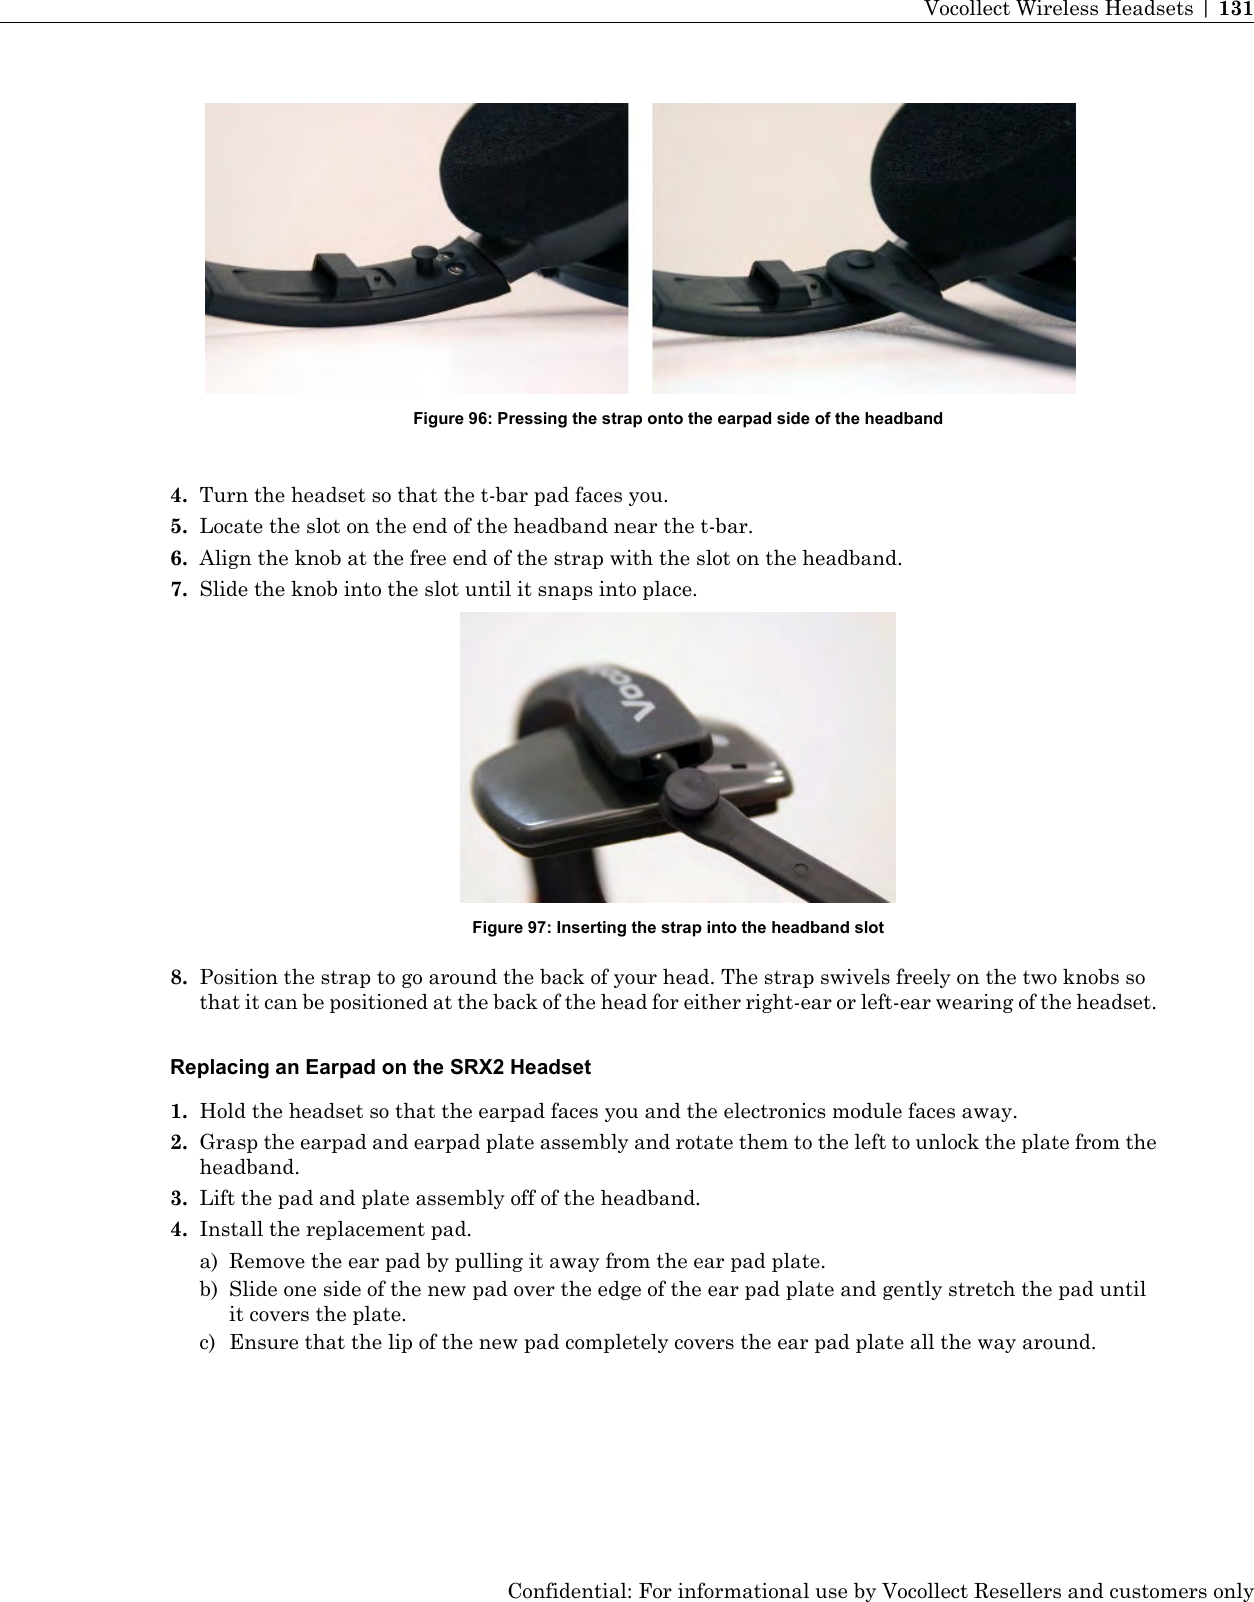 Figure 96: Pressing the strap onto the earpad side of the headband4. Turn the headset so that the t-bar pad faces you.5. Locate the slot on the end of the headband near the t-bar.6. Align the knob at the free end of the strap with the slot on the headband.7. Slide the knob into the slot until it snaps into place.Figure 97: Inserting the strap into the headband slot8. Position the strap to go around the back of your head. The strap swivels freely on the two knobs sothat it can be positioned at the back of the head for either right-ear or left-ear wearing of the headset.Replacing an Earpad on the SRX2 Headset1. Hold the headset so that the earpad faces you and the electronics module faces away.2. Grasp the earpad and earpad plate assembly and rotate them to the left to unlock the plate from theheadband.3. Lift the pad and plate assembly off of the headband.4. Install the replacement pad.a) Remove the ear pad by pulling it away from the ear pad plate.b) Slide one side of the new pad over the edge of the ear pad plate and gently stretch the pad untilit covers the plate.c) Ensure that the lip of the new pad completely covers the ear pad plate all the way around.Confidential: For informational use by Vocollect Resellers and customers onlyVocollect Wireless Headsets | 131